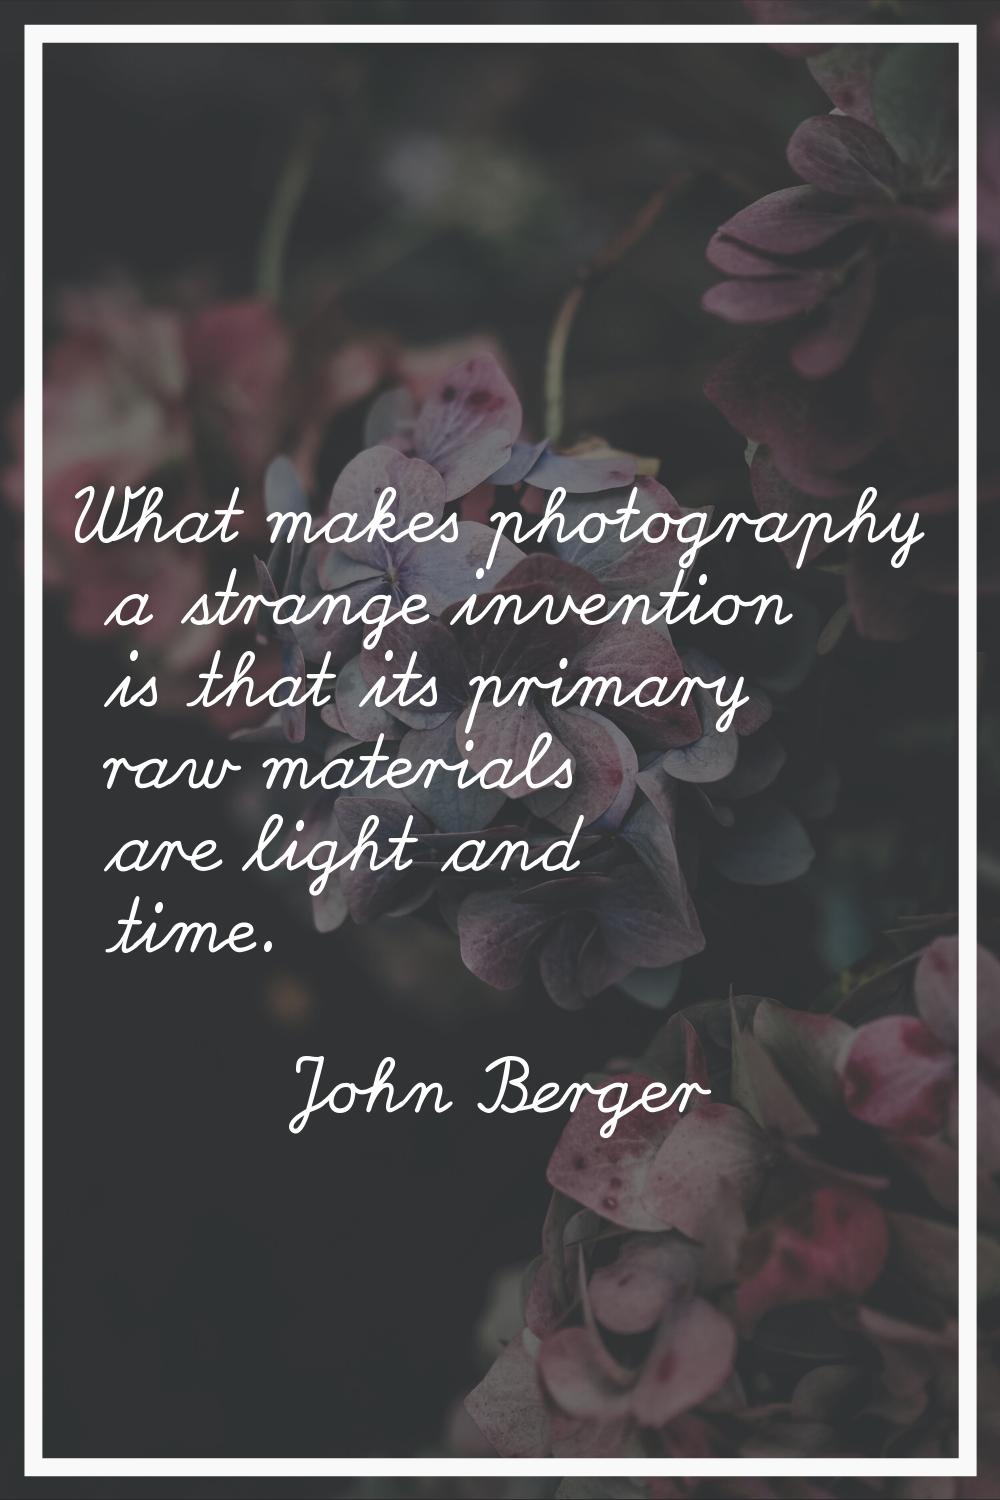 What makes photography a strange invention is that its primary raw materials are light and time.